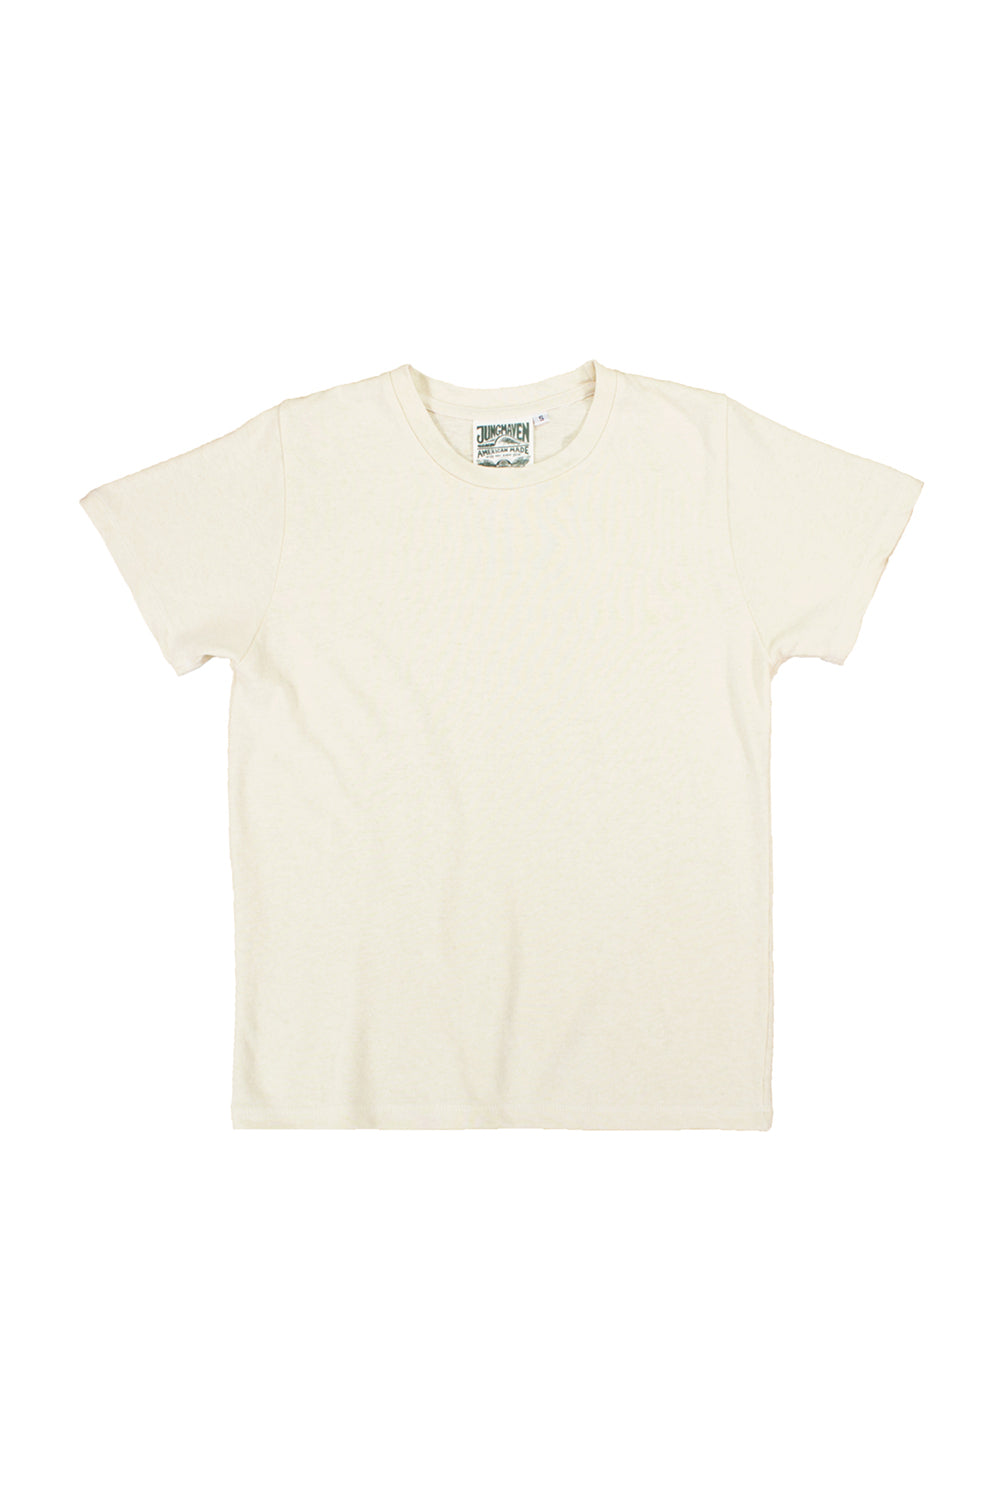 Utah Tee | Jungmaven Hemp Clothing & Accessories / Color: Washed White